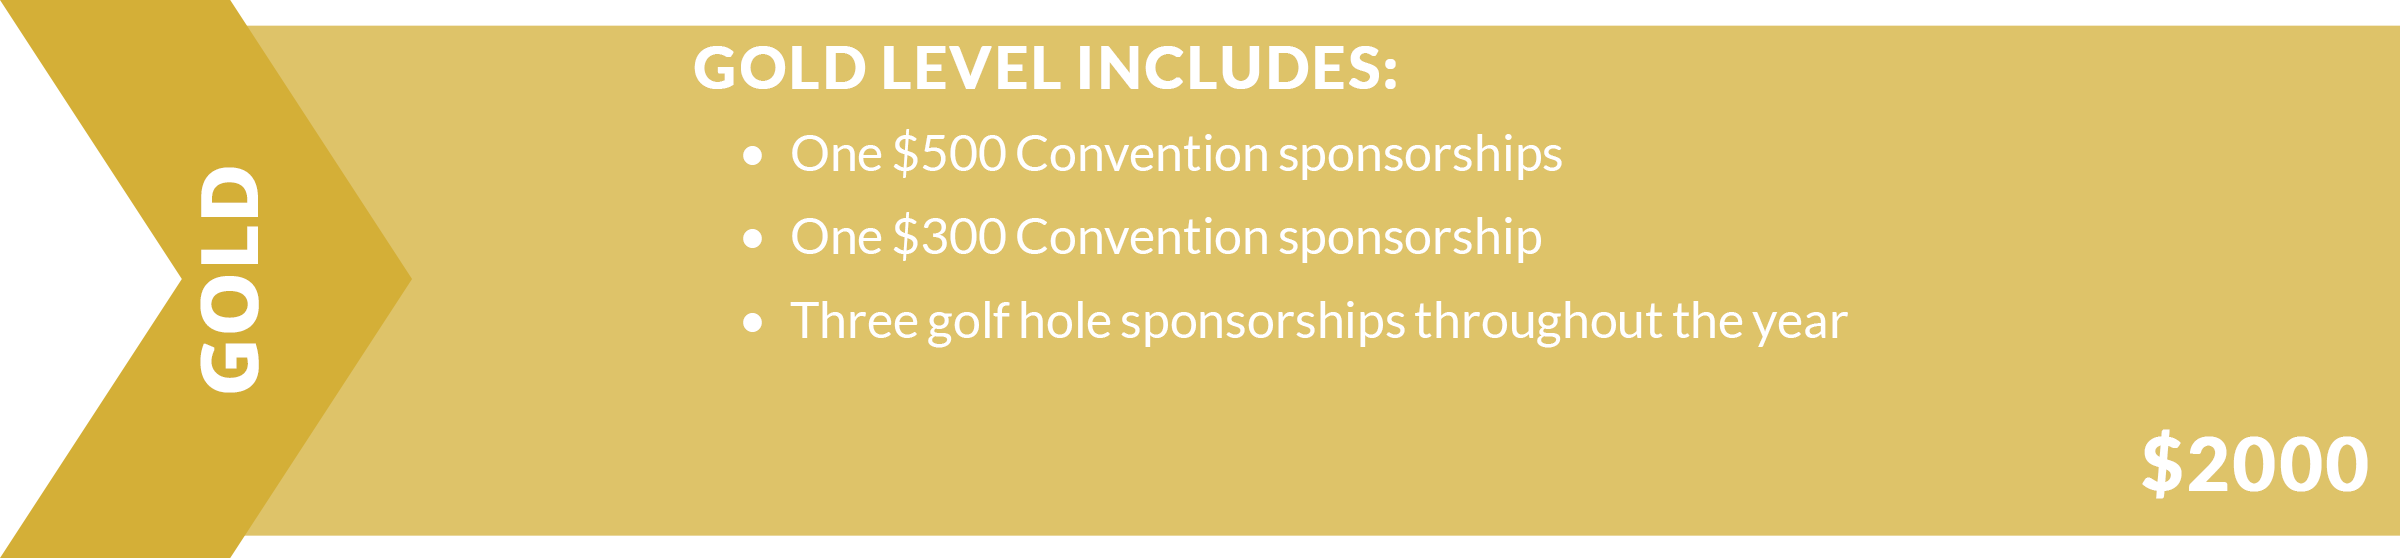 Gold Level Sponsorship Includes: One $500 Convention sponsorships. One $300 Convention sponsorship. Three golf hole sponsorships throughout the year.